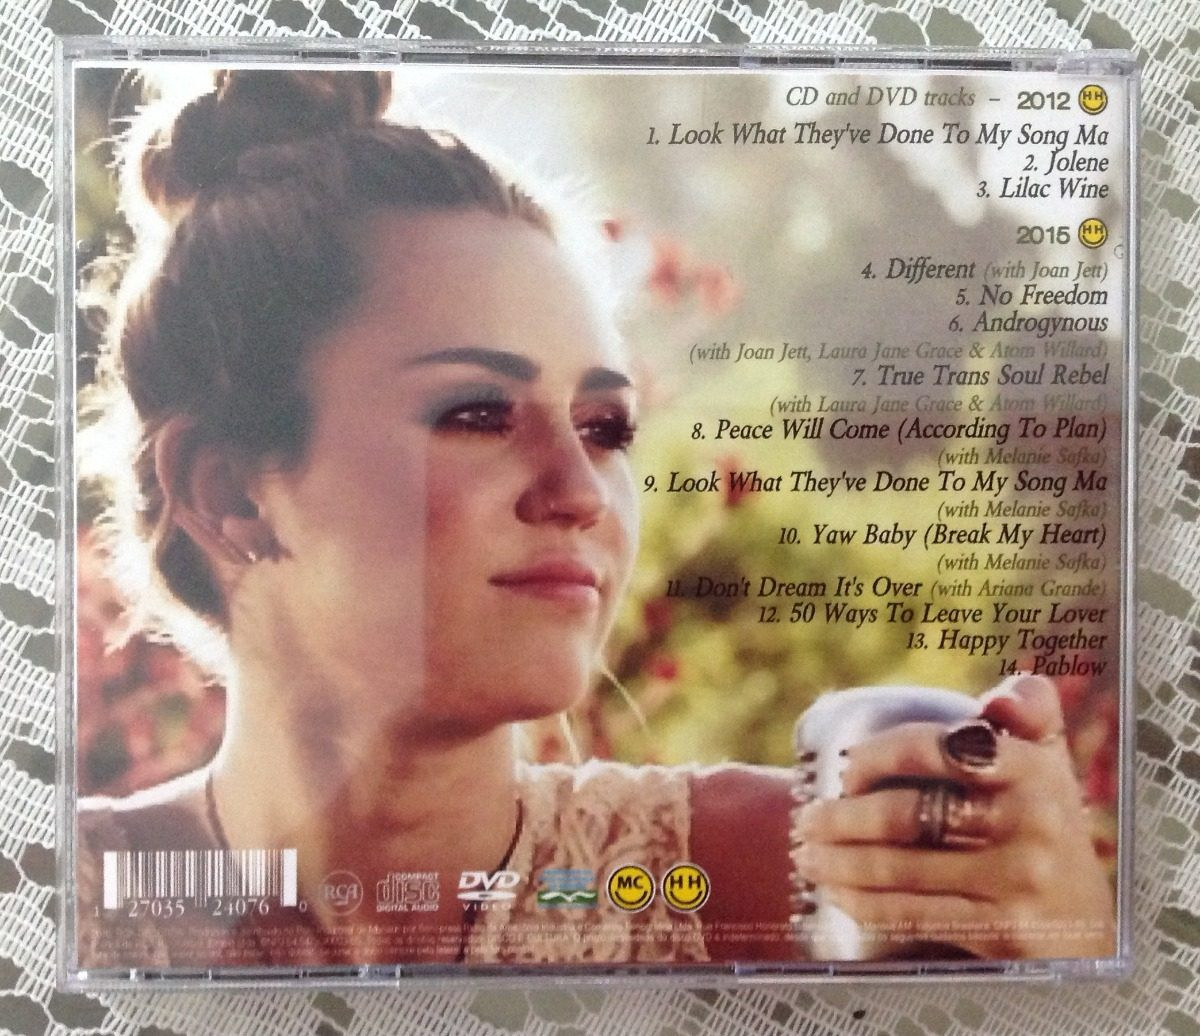 The Backyard Sessions
 Miley Cyrus The Backyard Sessions 2012 2015 Cd Dvd